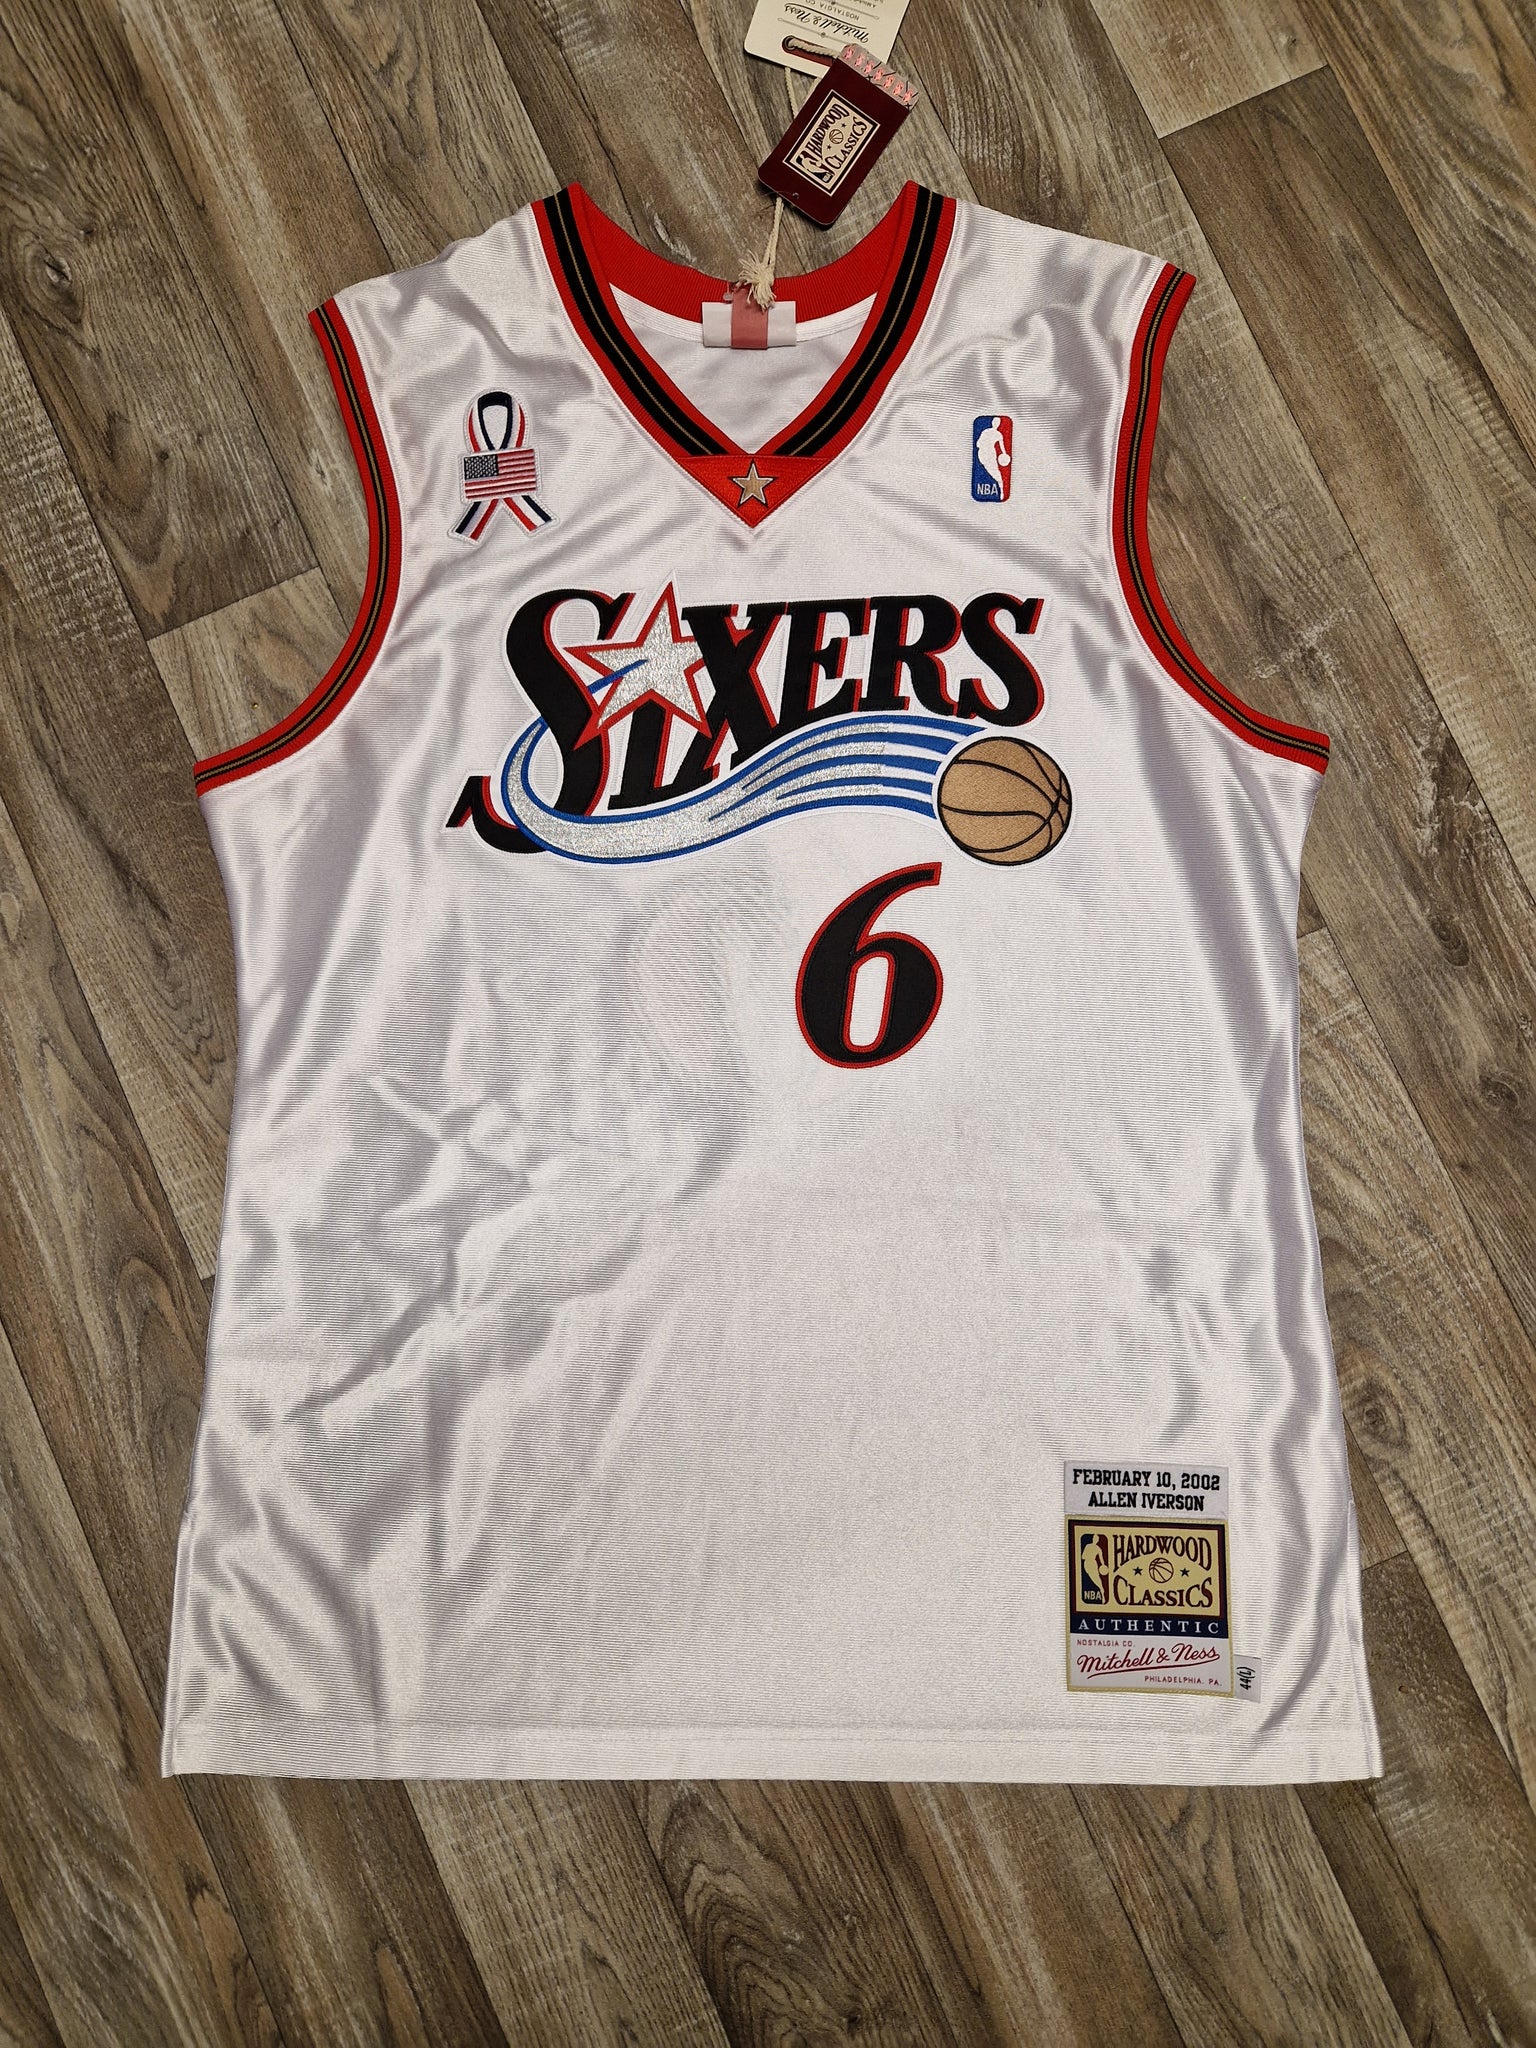 🏀 Allen Iverson Authentic NBA All Star 2002 Jersey – The